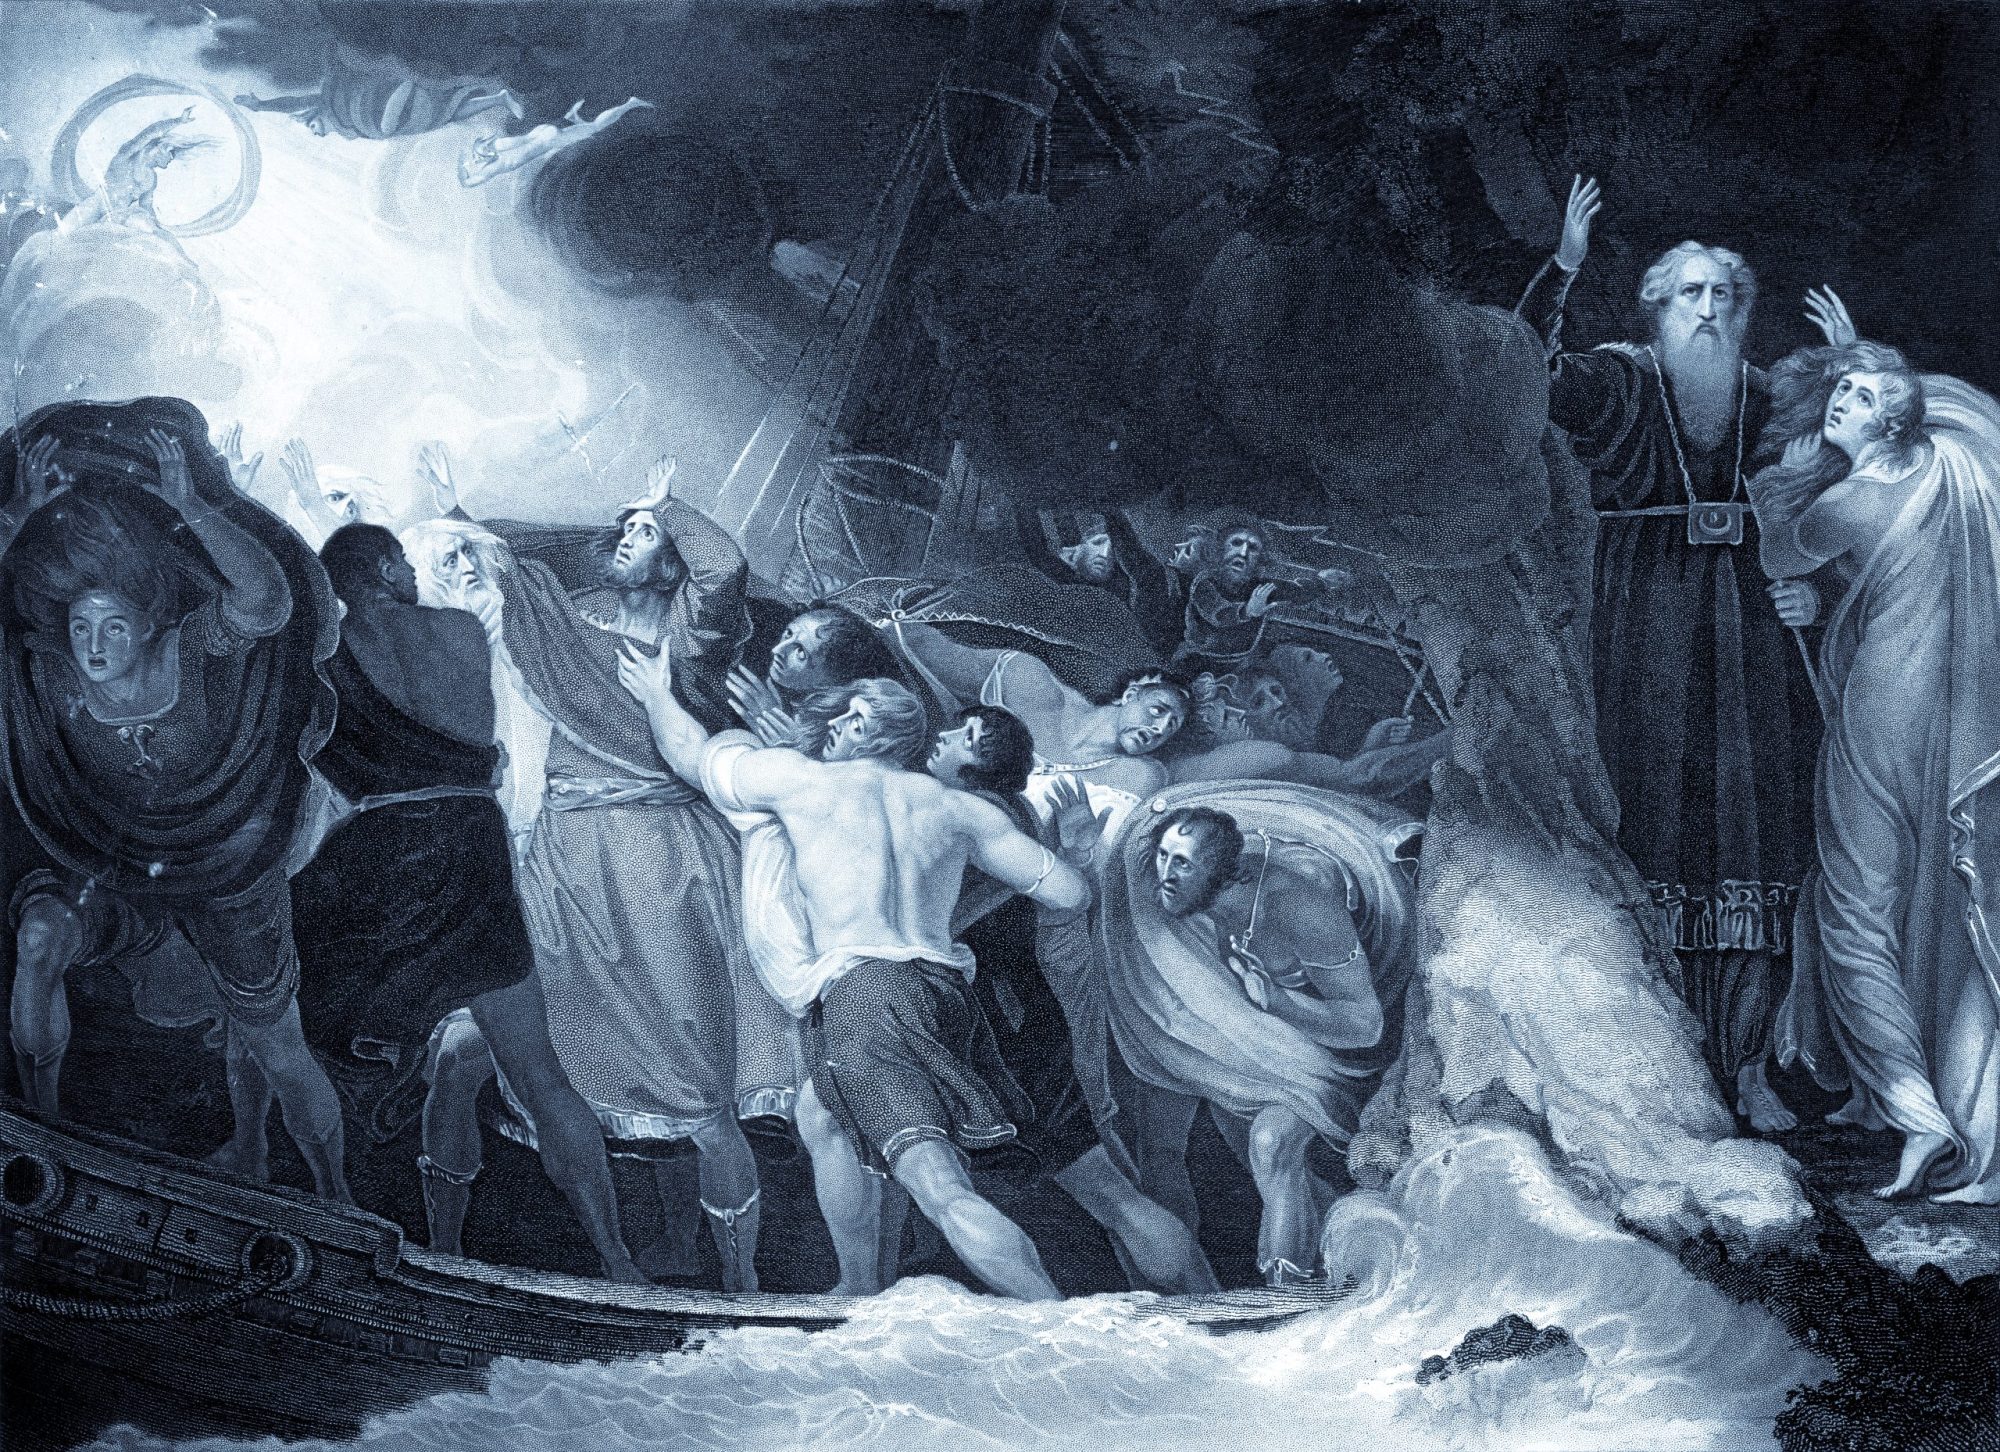 Vintage engraving of the first act and scene of Shakespeare's play, The Tempest.